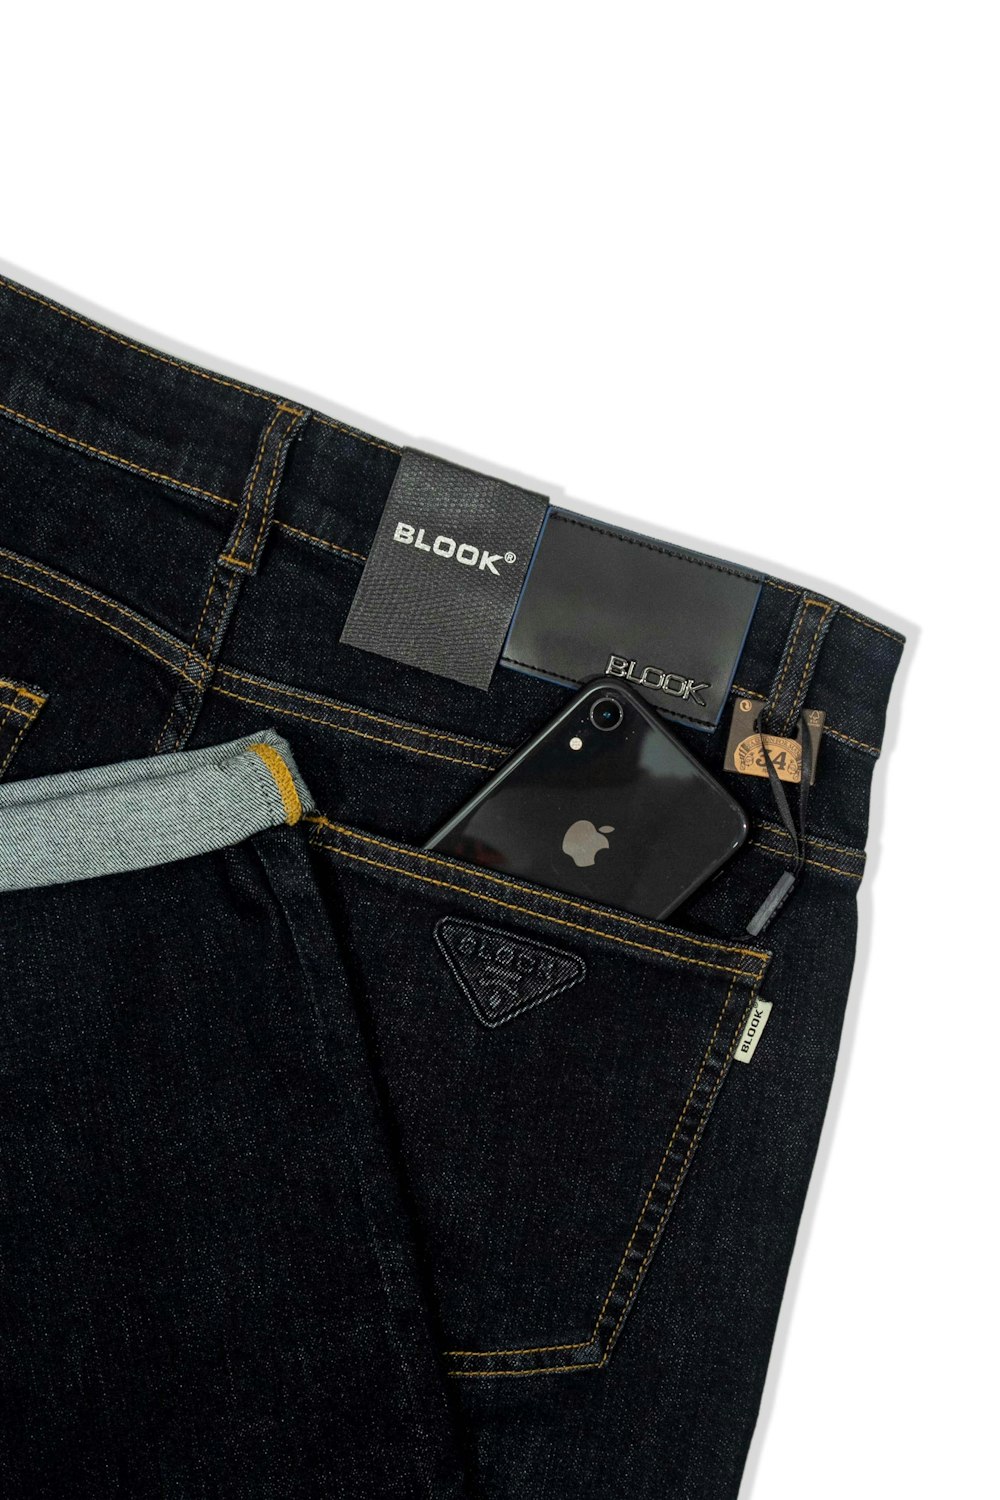 a pair of jeans with a cell phone sticking out of the pocket